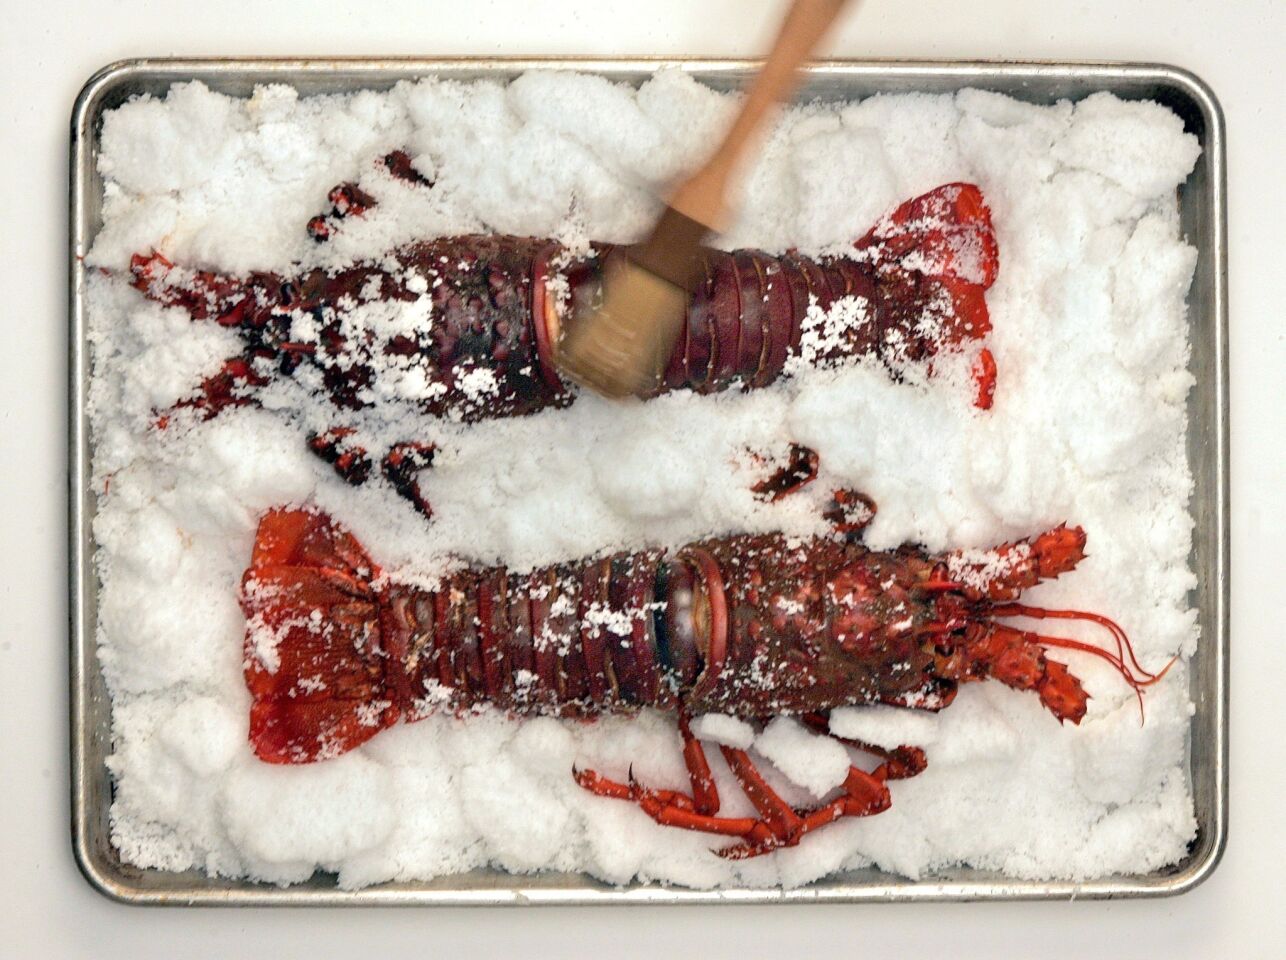 The salt crust retains moisture and deep flavor, making for an intensely-flavored dish. Recipe: Salt-roasted spiny lobster with saffron aioli